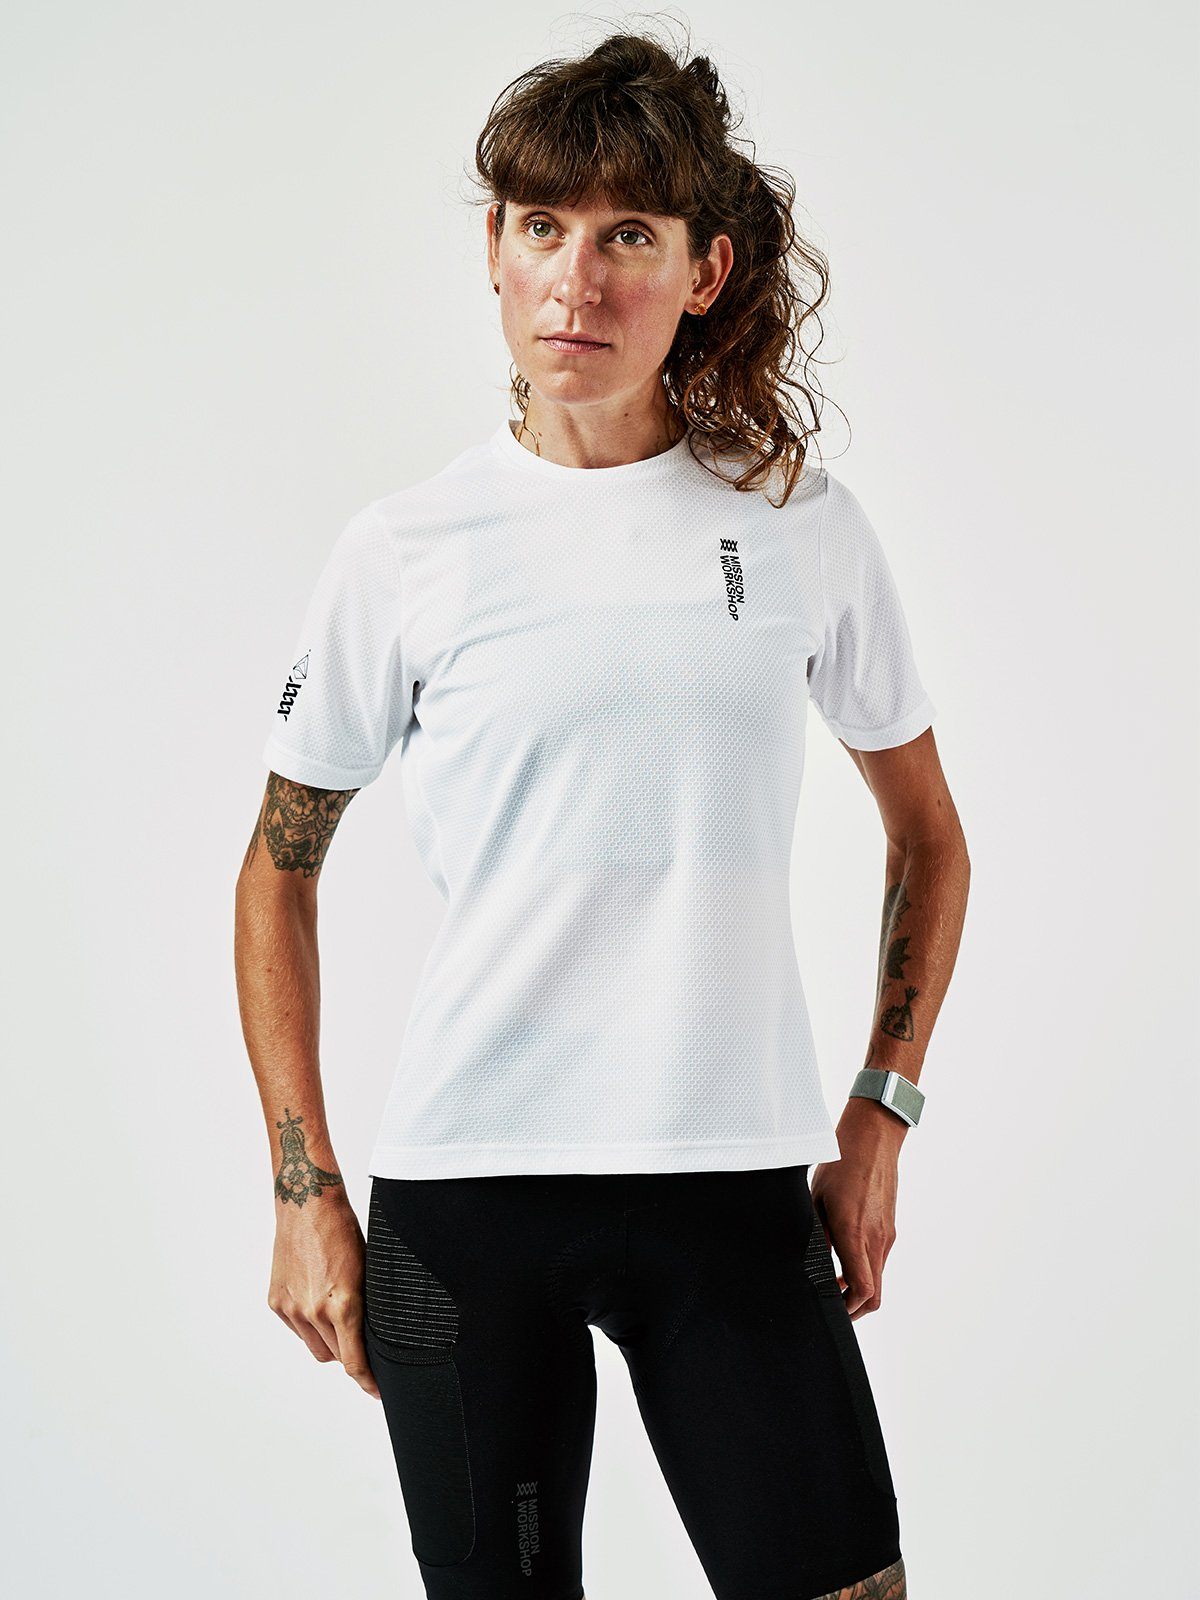 Mission Pro Tech Tee Women's by Mission Workshop - Weatherproof Bags & Technical Apparel - San Francisco & Los Angeles - Built to endure - Guaranteed forever